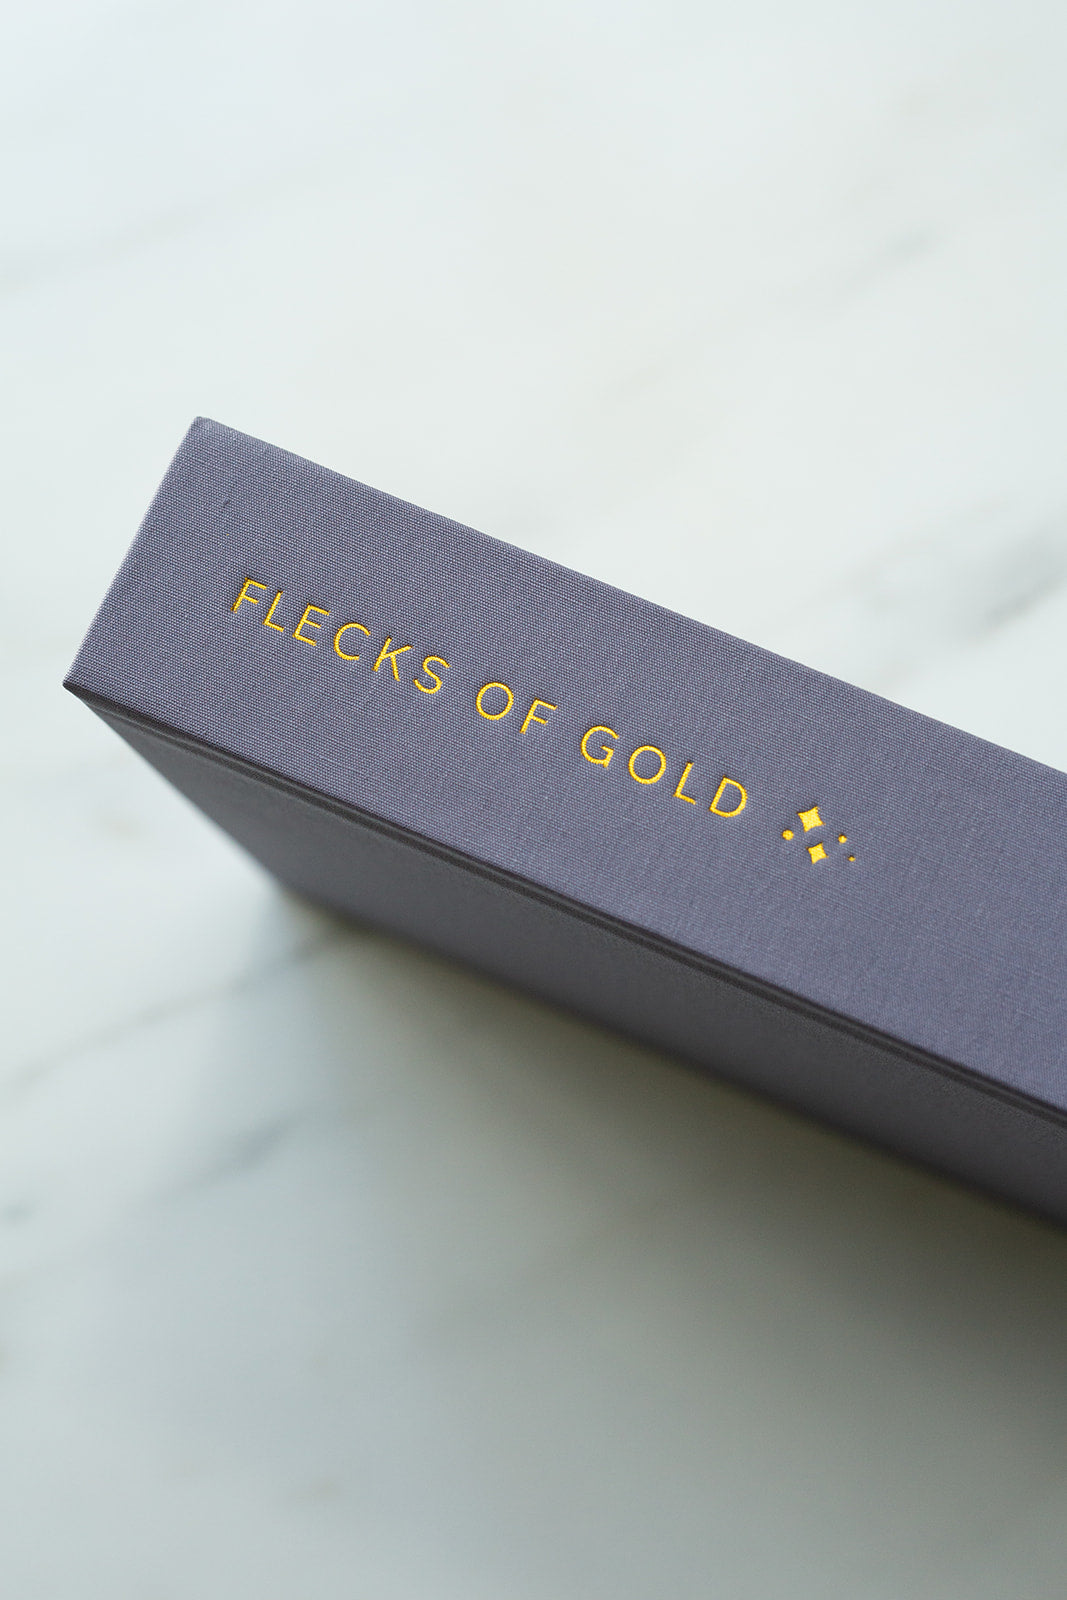 Beautiful Flecks of Gold Journal. Motherhood journal created by Rachel Nielson (host of the 3 in 30 Takeaways for Moms Podcast). A journal to help overwhelmed moms see the good, the magic, the gold in their everyday lives. Gold embossing.